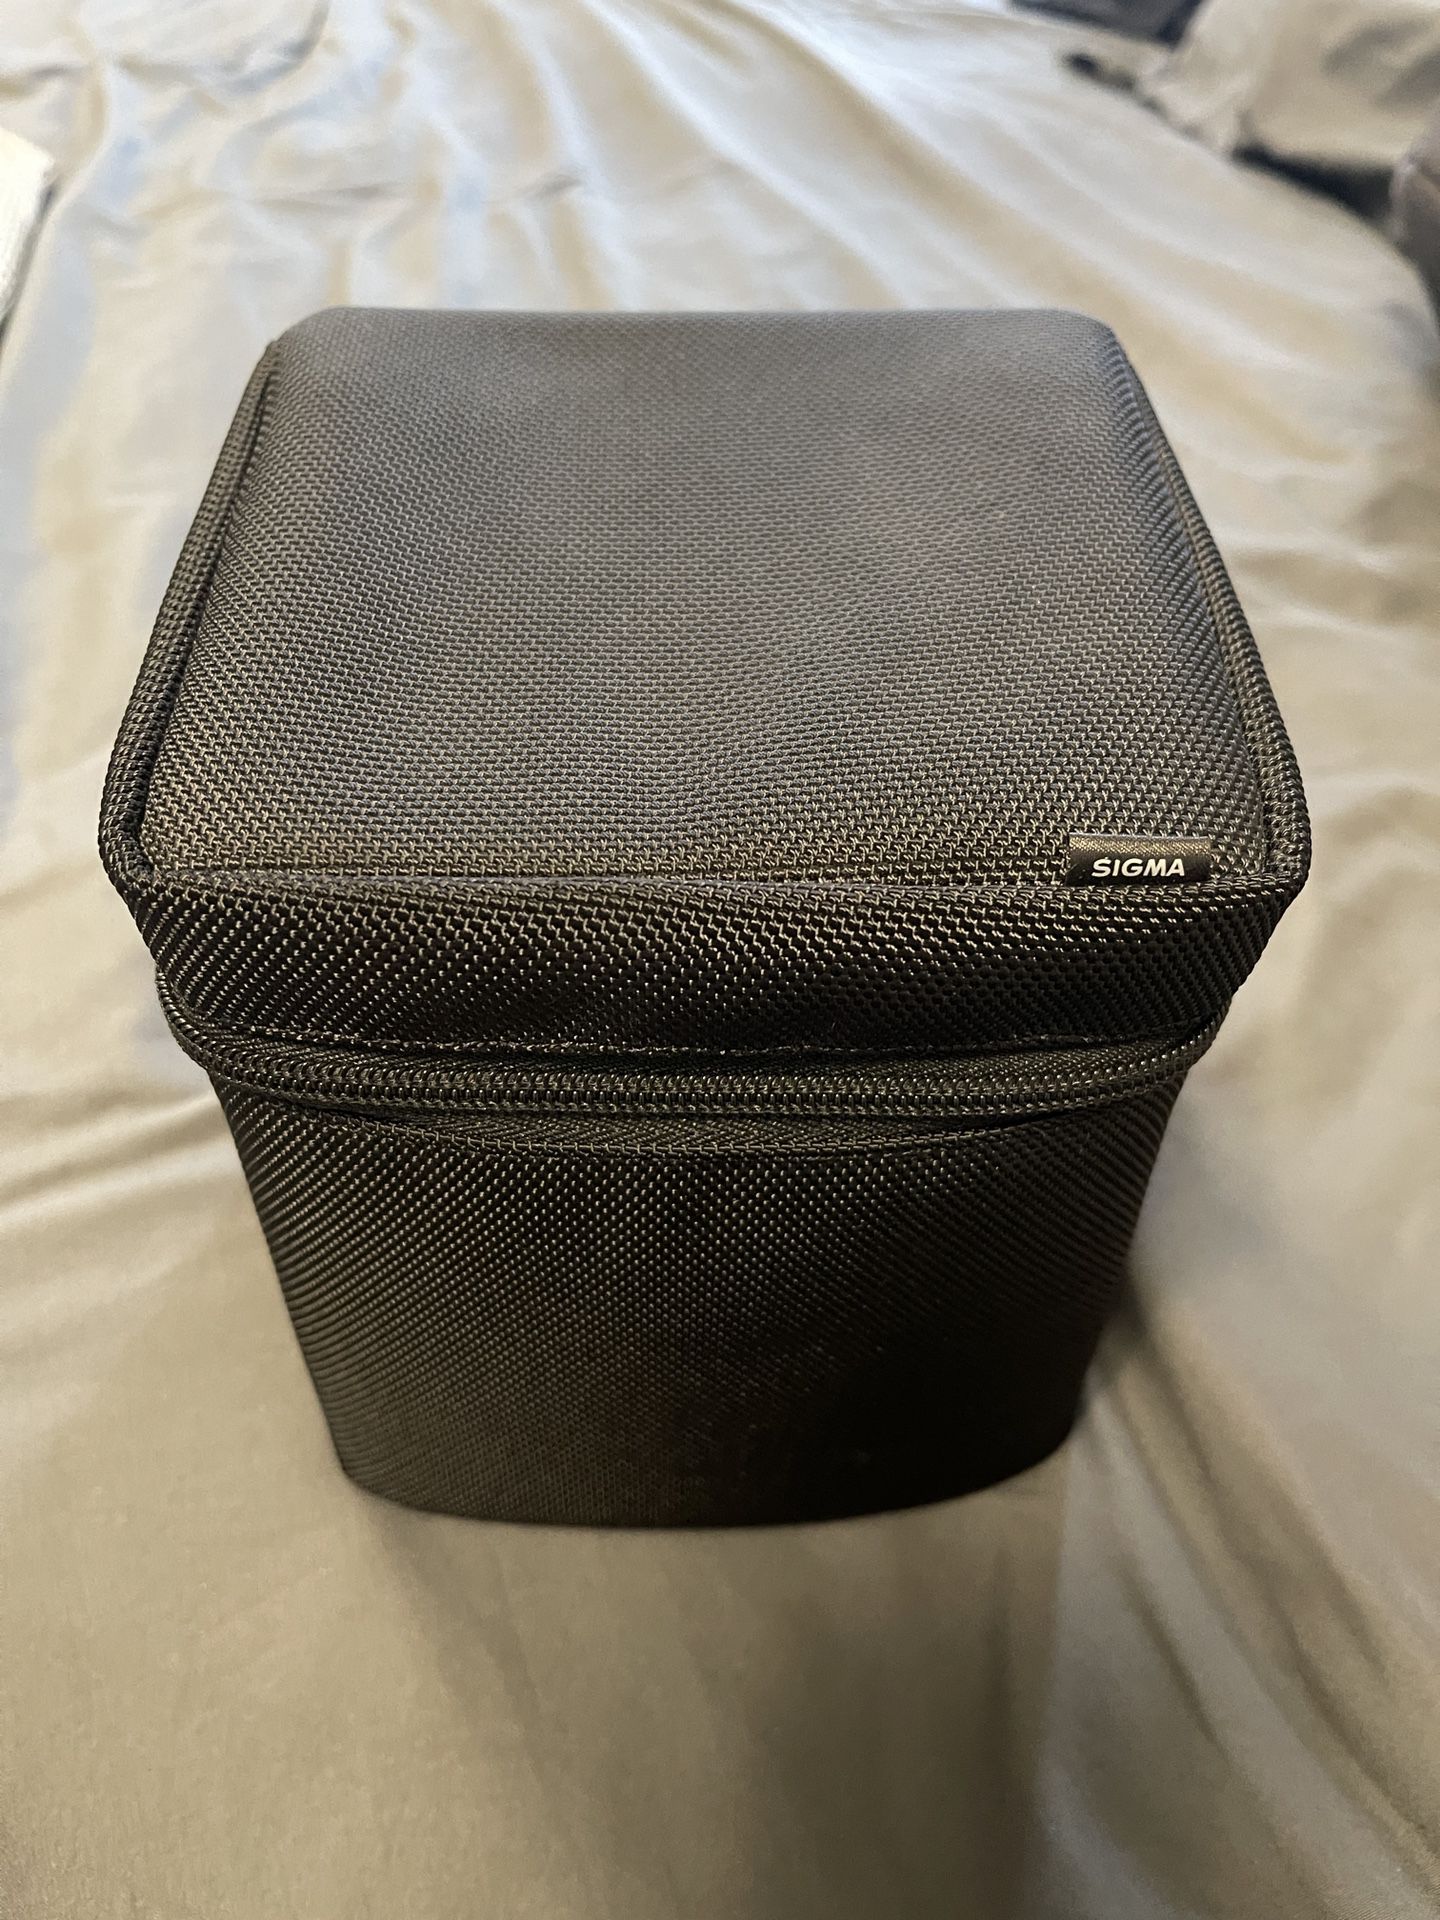 Sigma Lens Carrying Case For 24-70mm